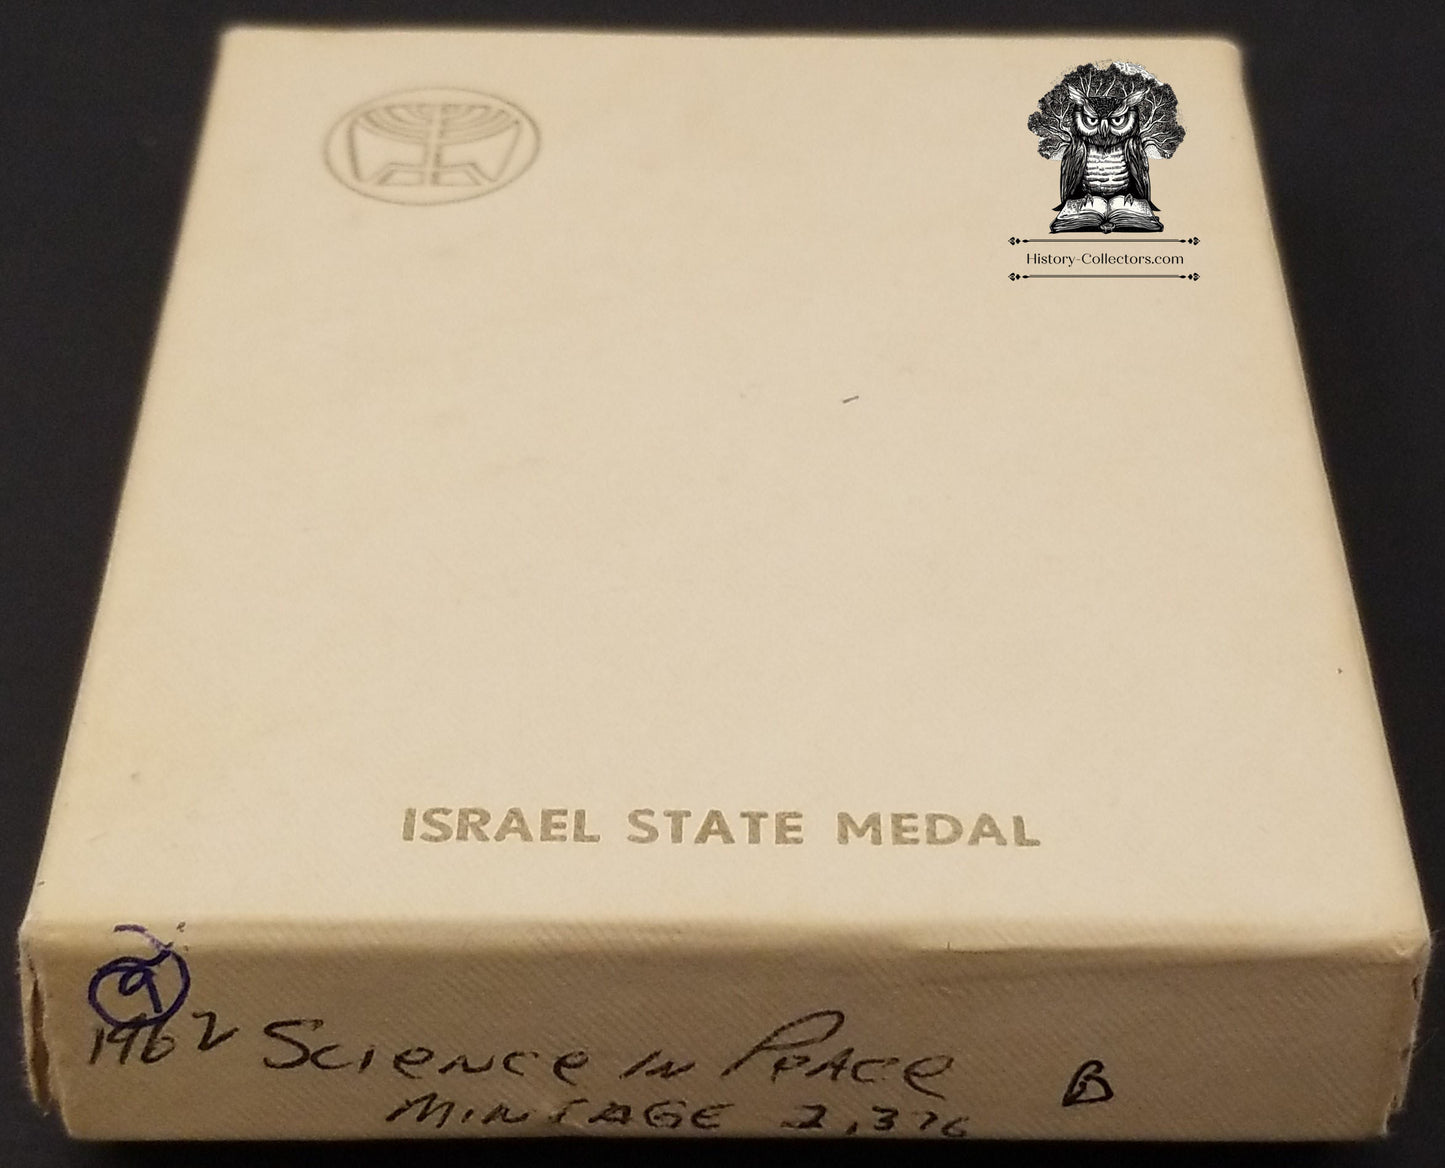 1962 Israel State Medal - Bronze - Shavit There Shall Come A Star Out Of Jacob - Numbers 24:17 - Science In The Service Of Peace - Meteorological Rocket Launch